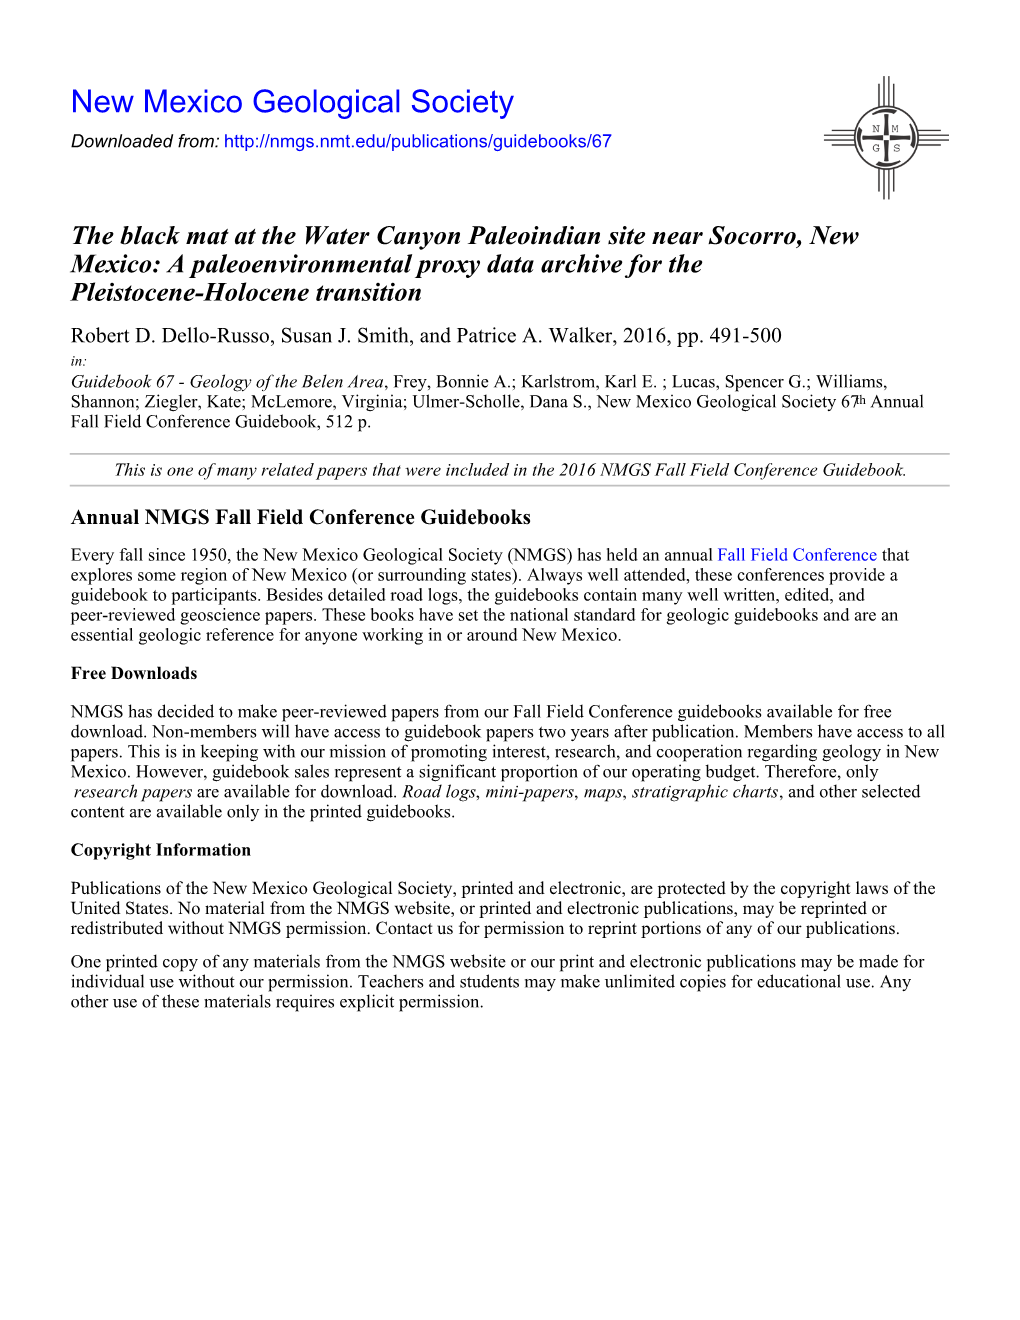 The Black Mat at the Water Canyon Paleoindian Site Near Socorro, New Mexico: a Paleoenvironmental Proxy Data Archive for the Pleistocene-Holocene Transition Robert D